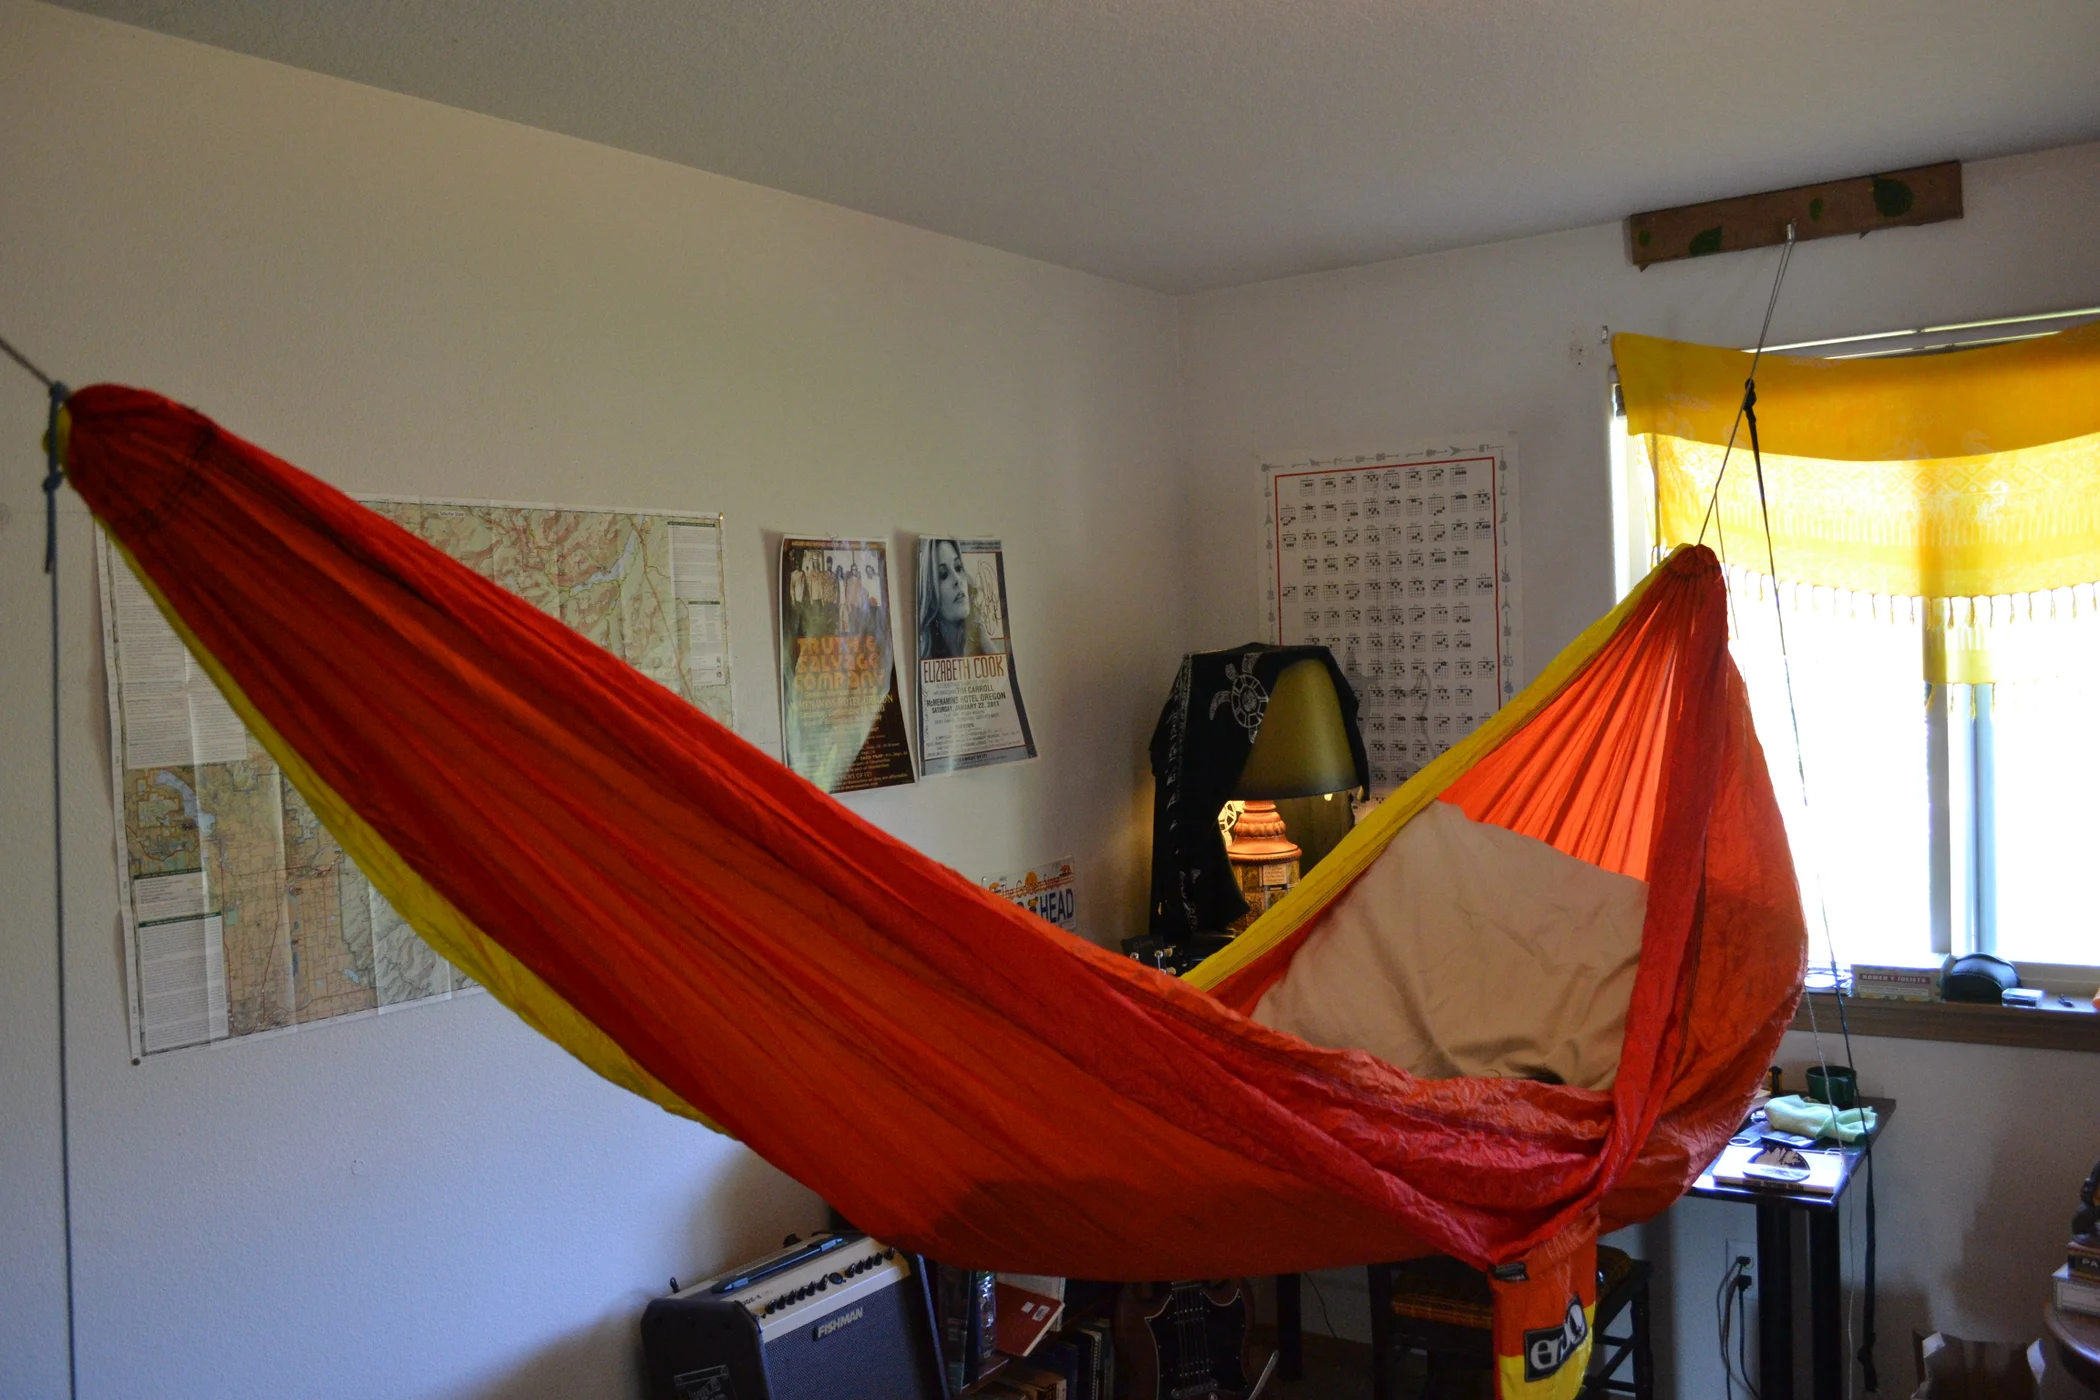 How To Hang A Hammock In An Apartment